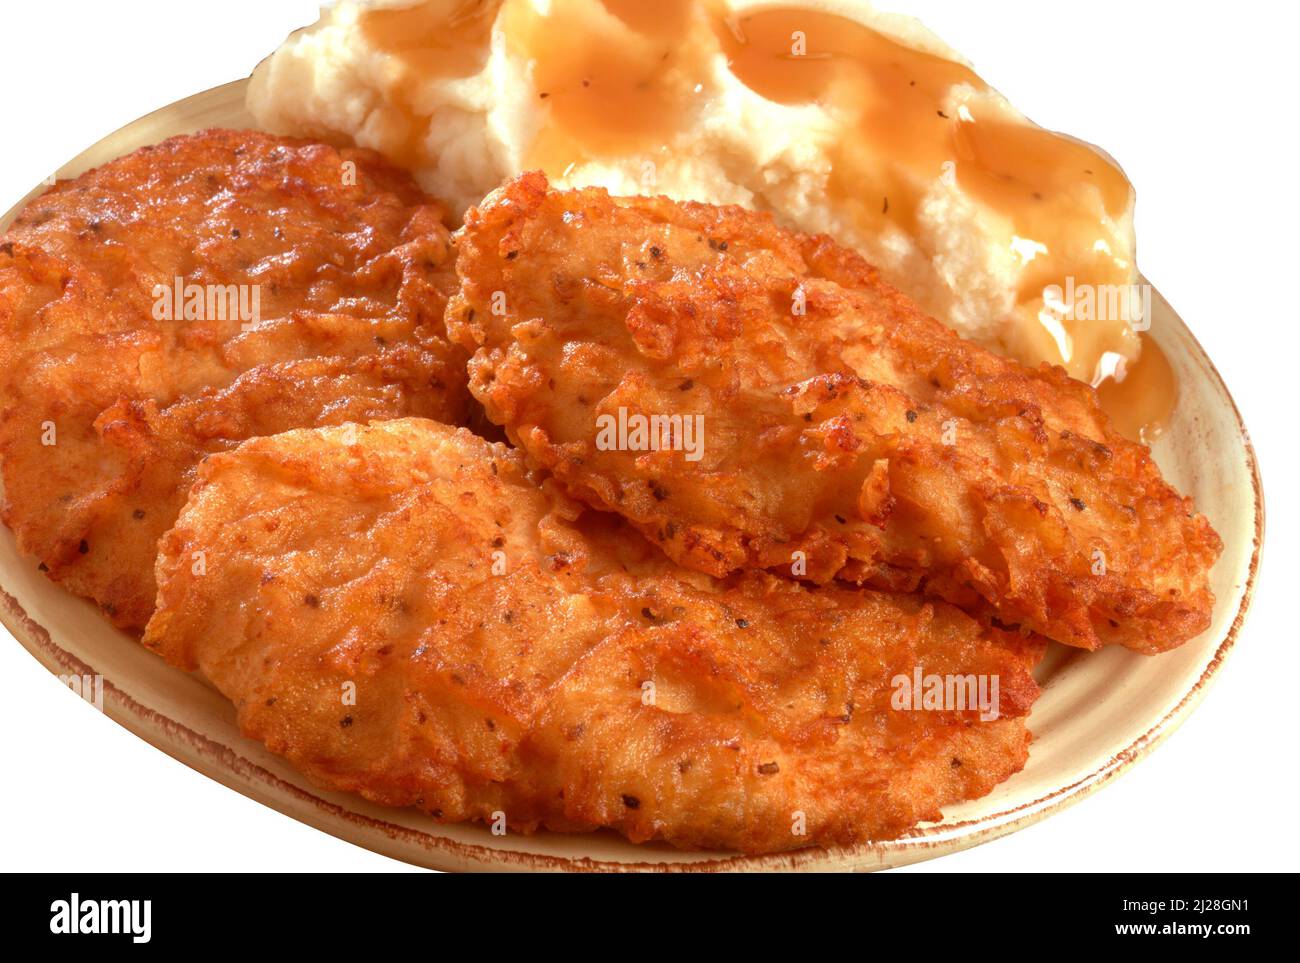 Fried Chicken and mashed potatoes Stock Photo